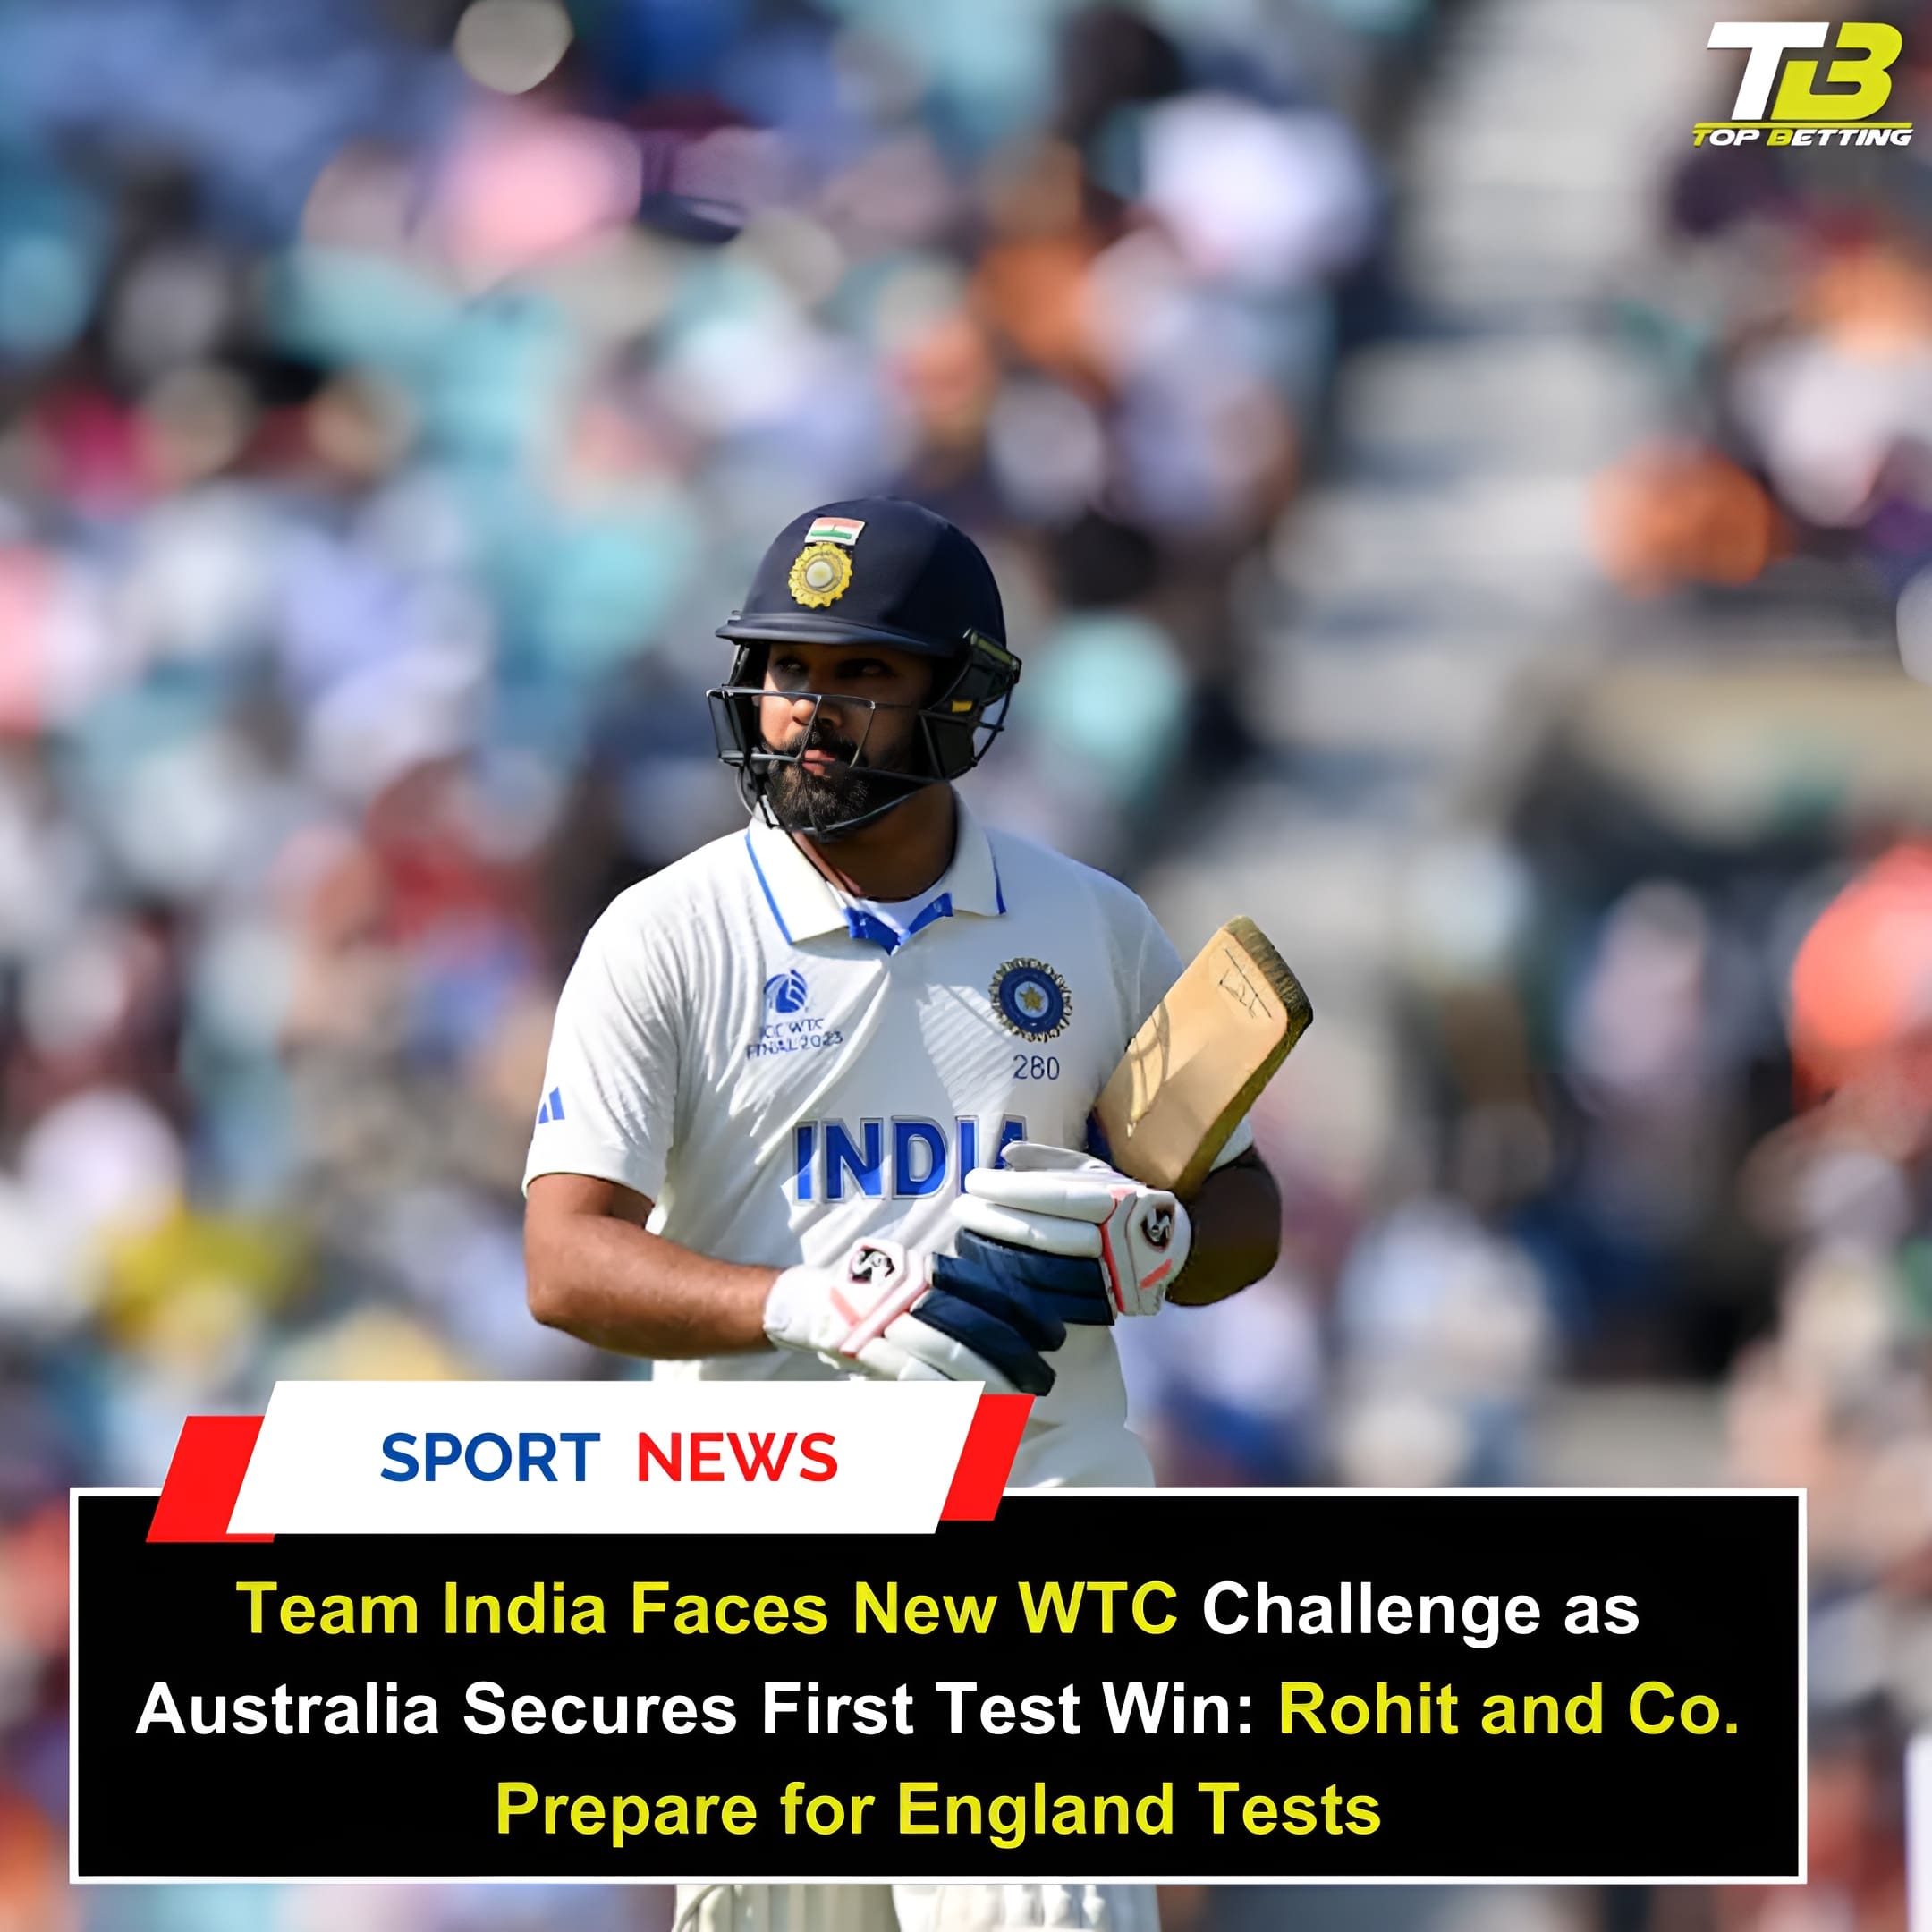 Team India Faces New WTC Challenge as Australia Secures First Test Win: Rohit and Co. Prepare for England Tests